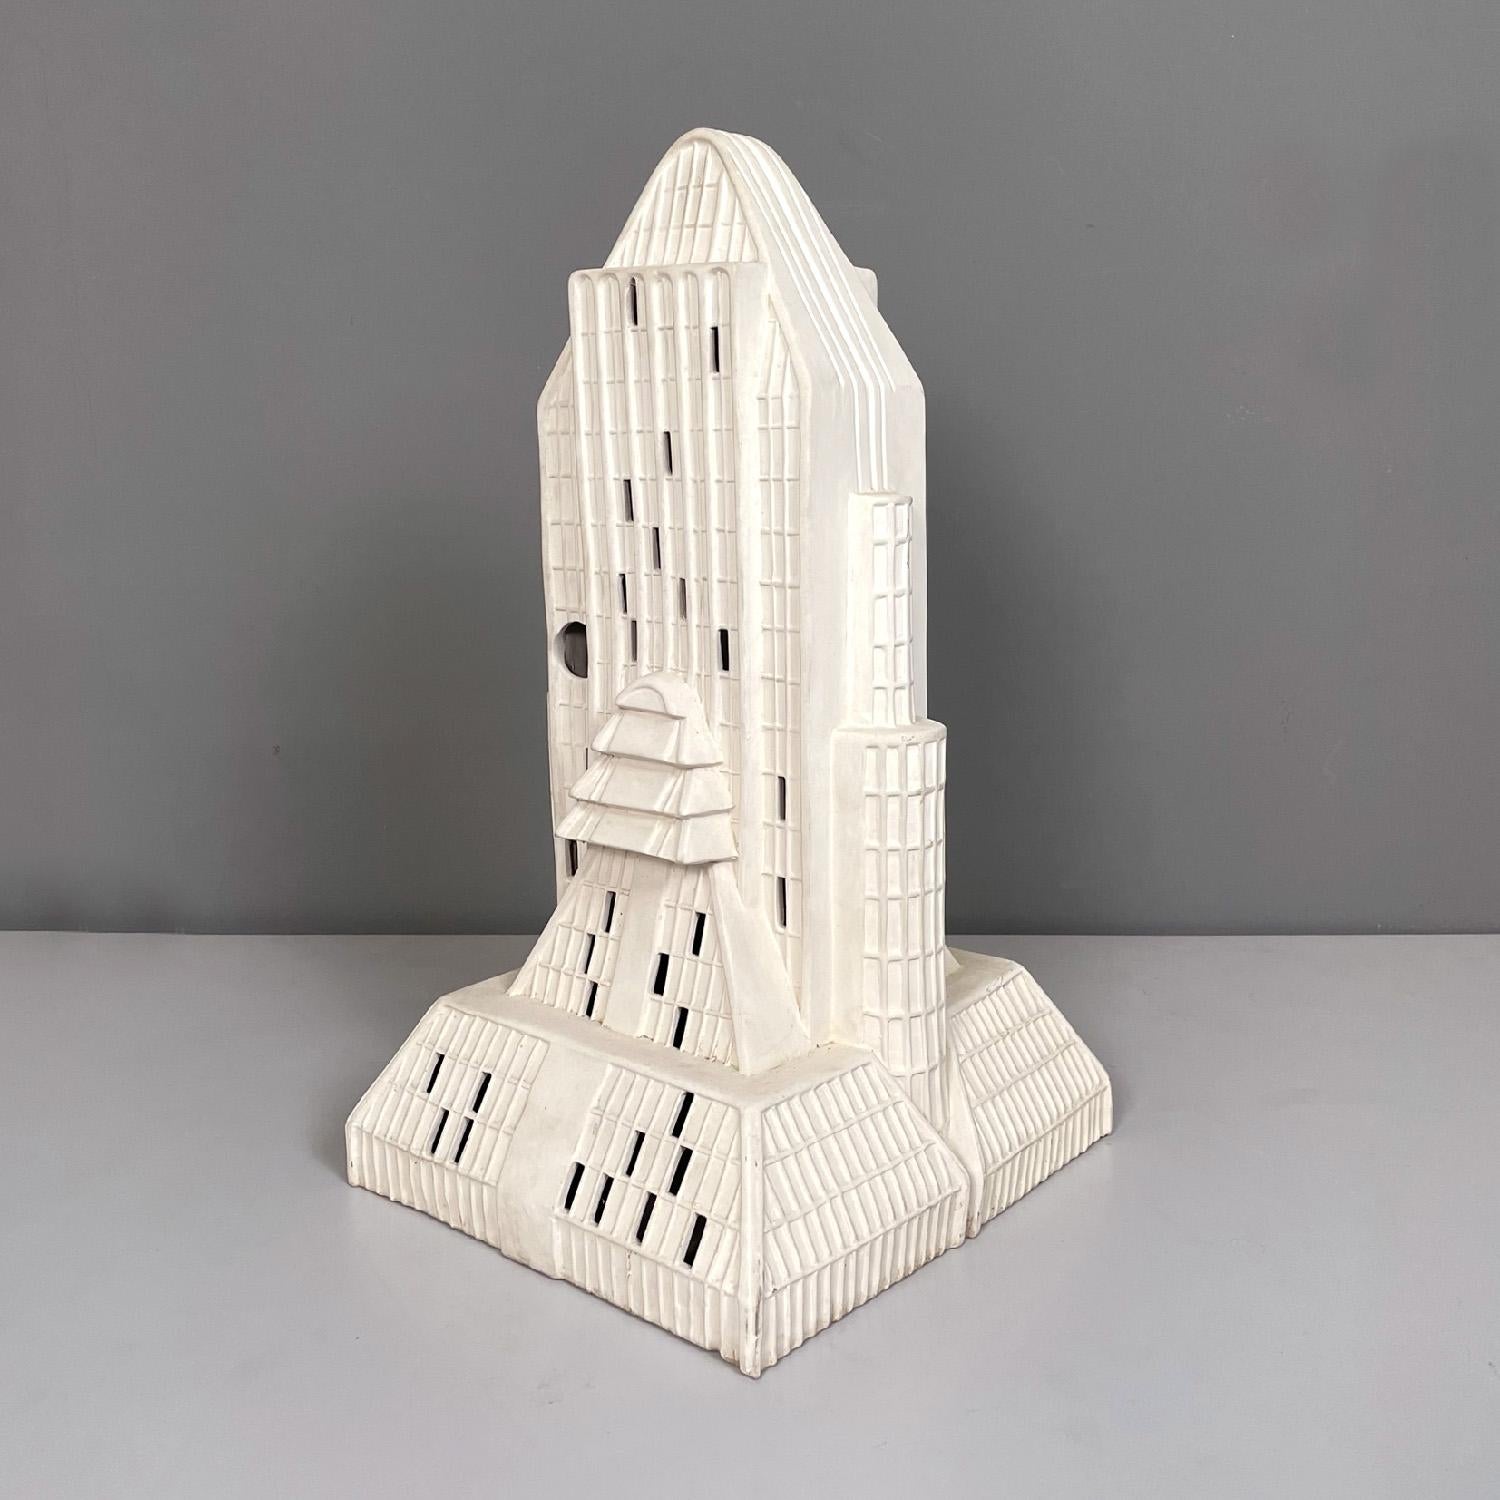 Italian modern skyscraper white beige Biscuit ceramic sculpture, 1980s
Sculpture with rectangular base in Biscuit ceramic. The sculpture represents a skyscraper, on one side there is a circular hole and small rectangular holes that correspond to the